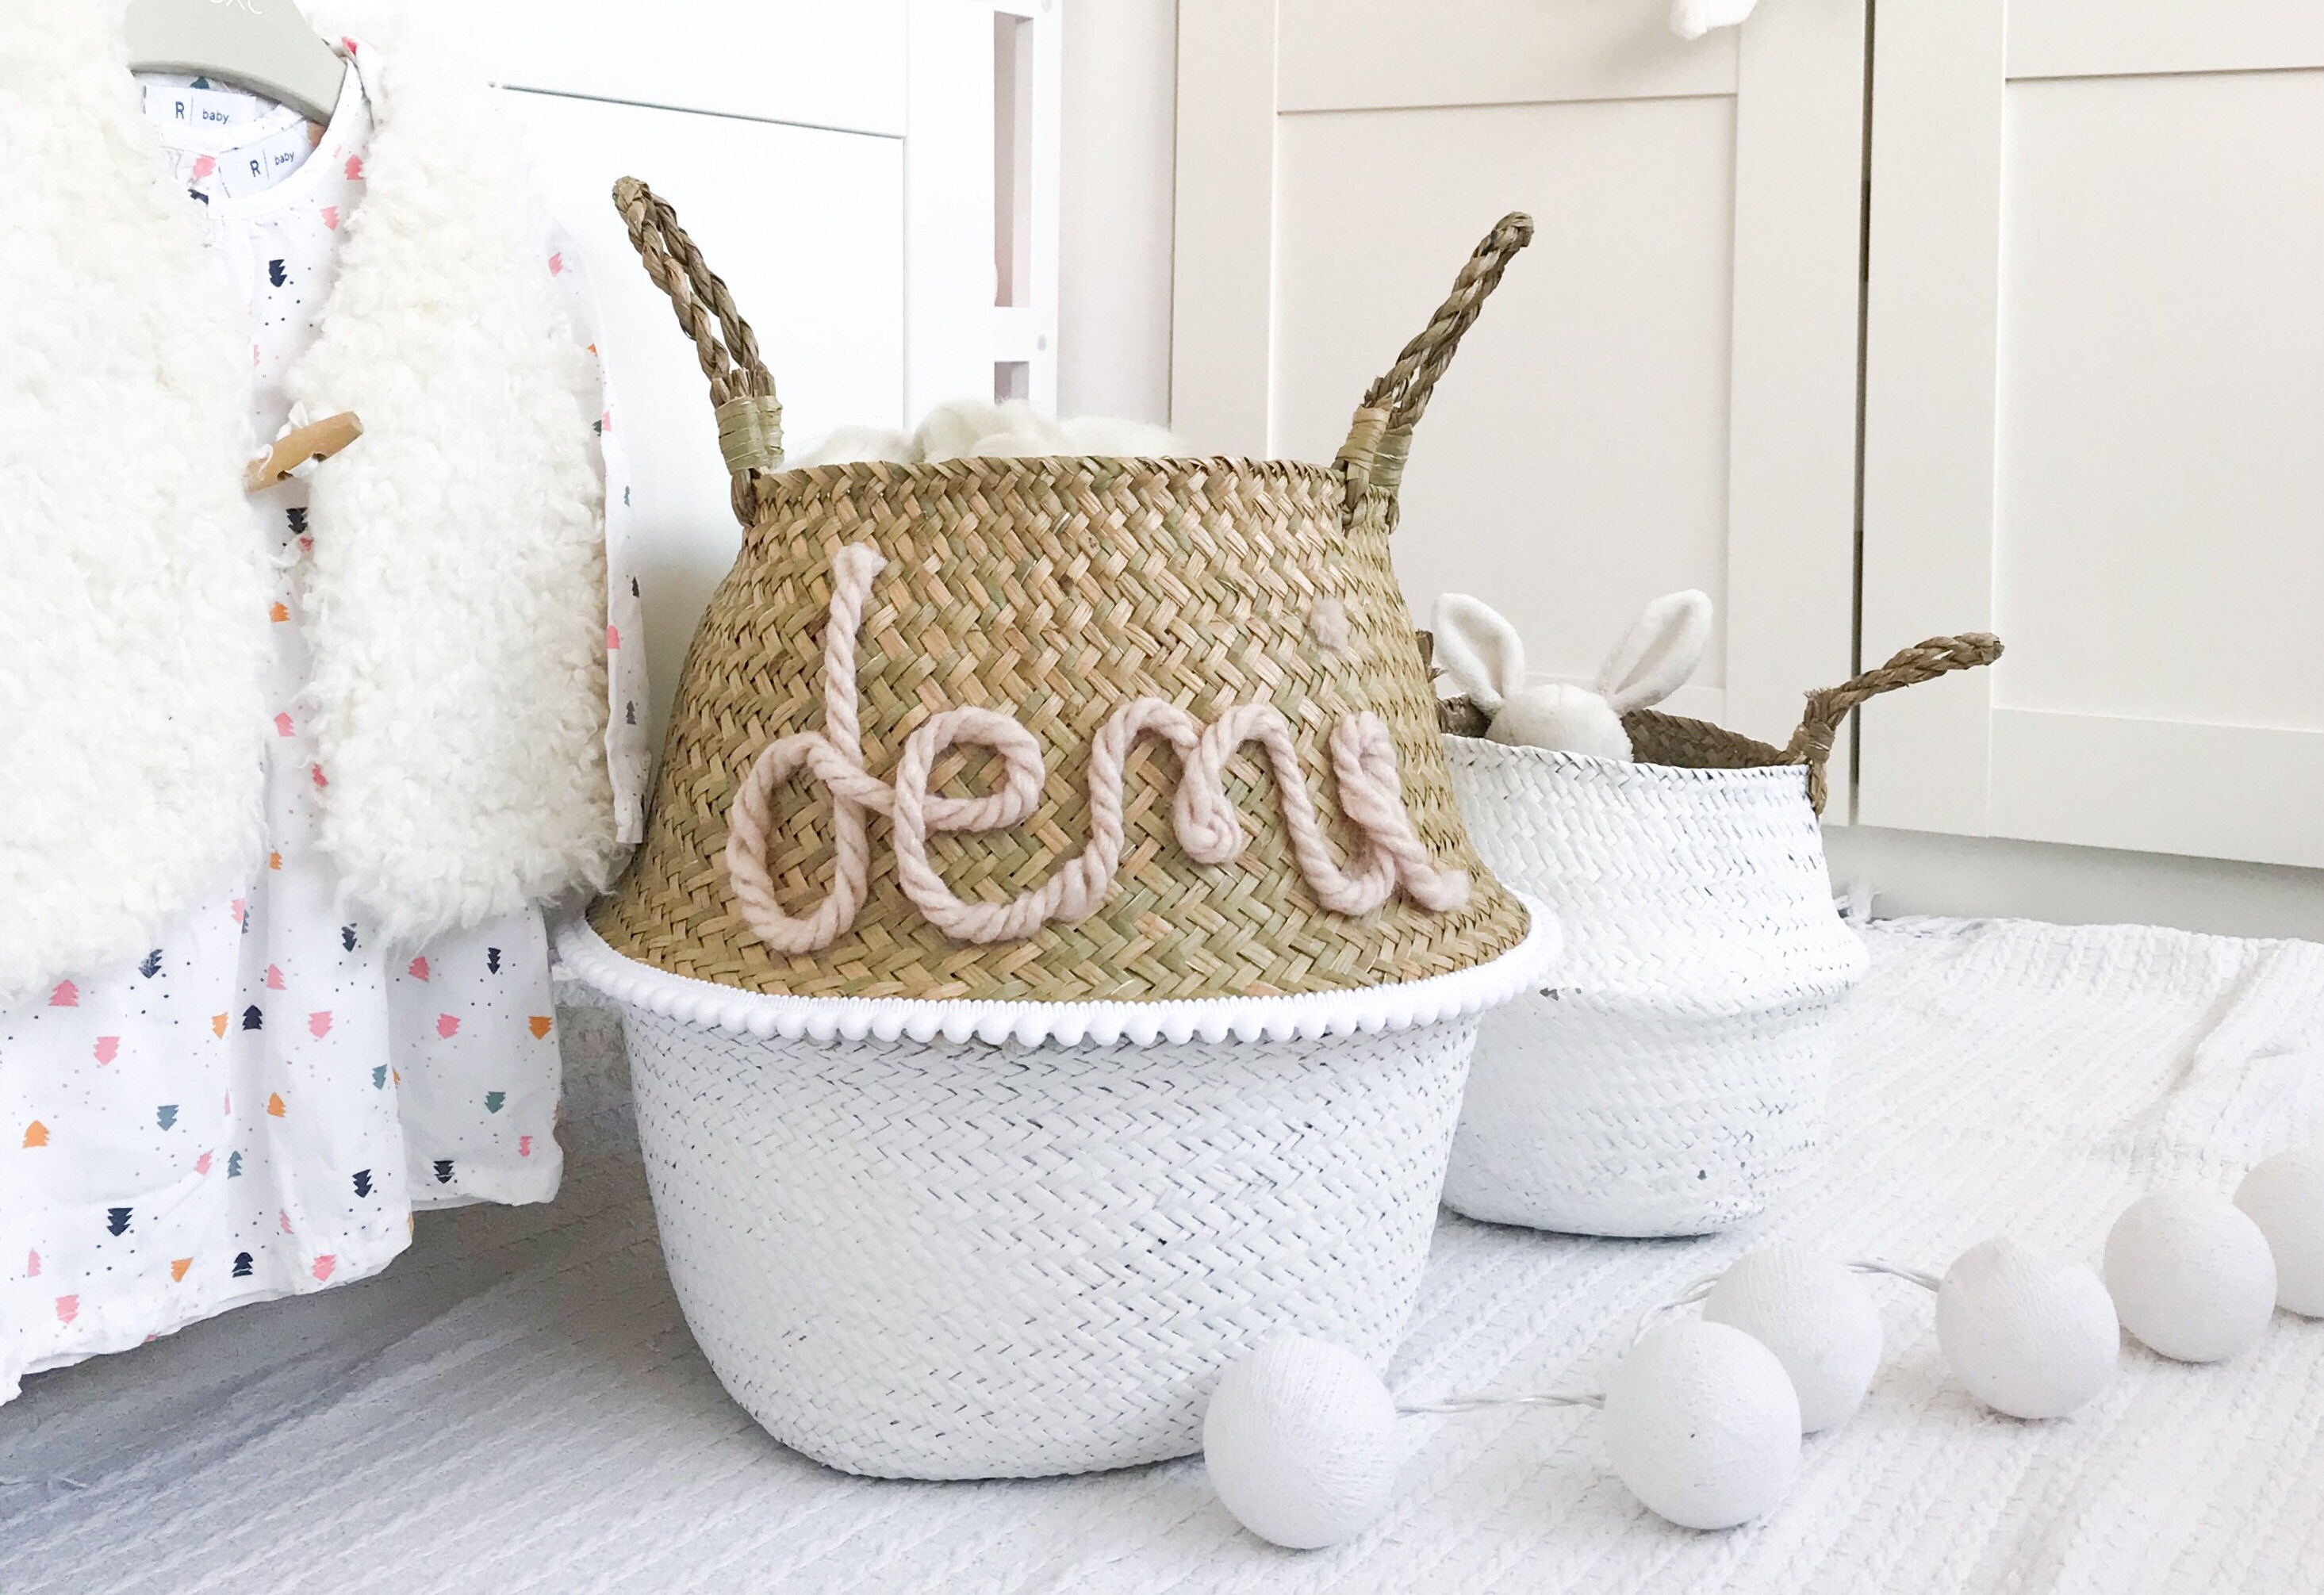 Cat Dog Toy Basket Small Round Storage Baskets Set of 3 Woven Basket for Organization Hombins Decorative Storage Baskets for Nursery Baby Clothes White&Brown Toy Makeup 